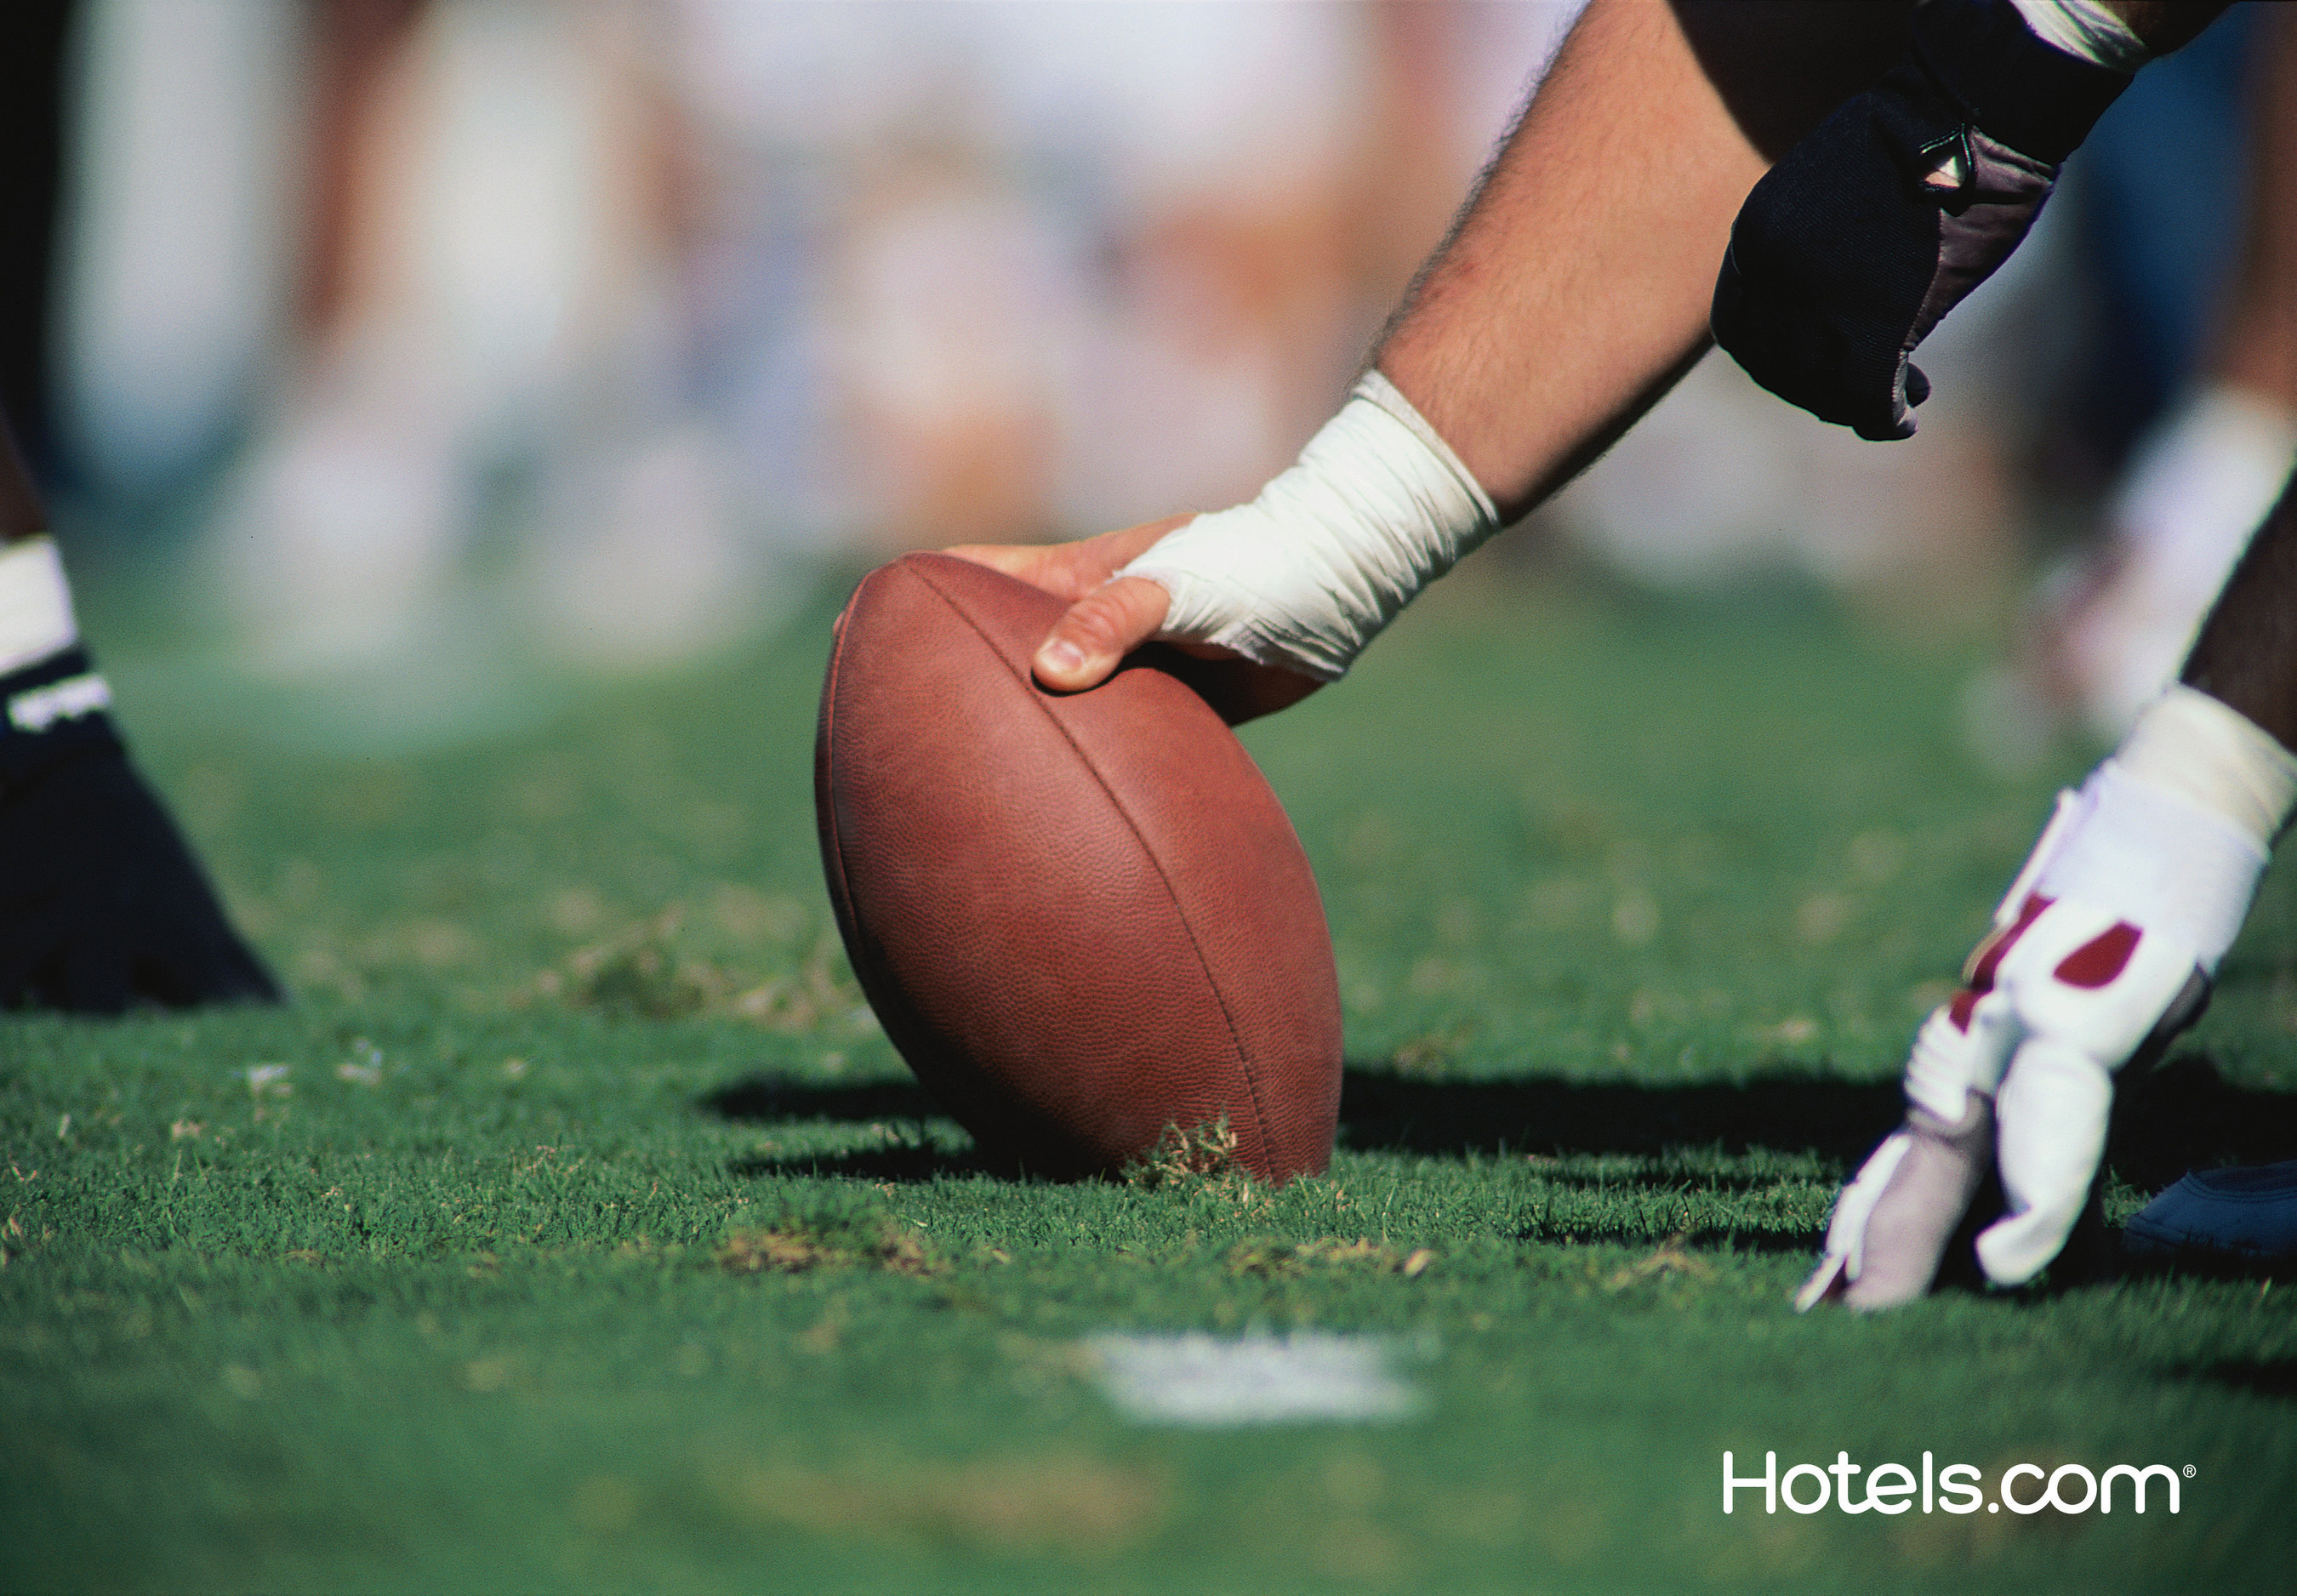 As the Phoenix-area prepares to host the biggest football game of the year, the travel experts at Hotels.com have compiled last-minute booking tips for fans who haven't yet reserved their hotel rooms